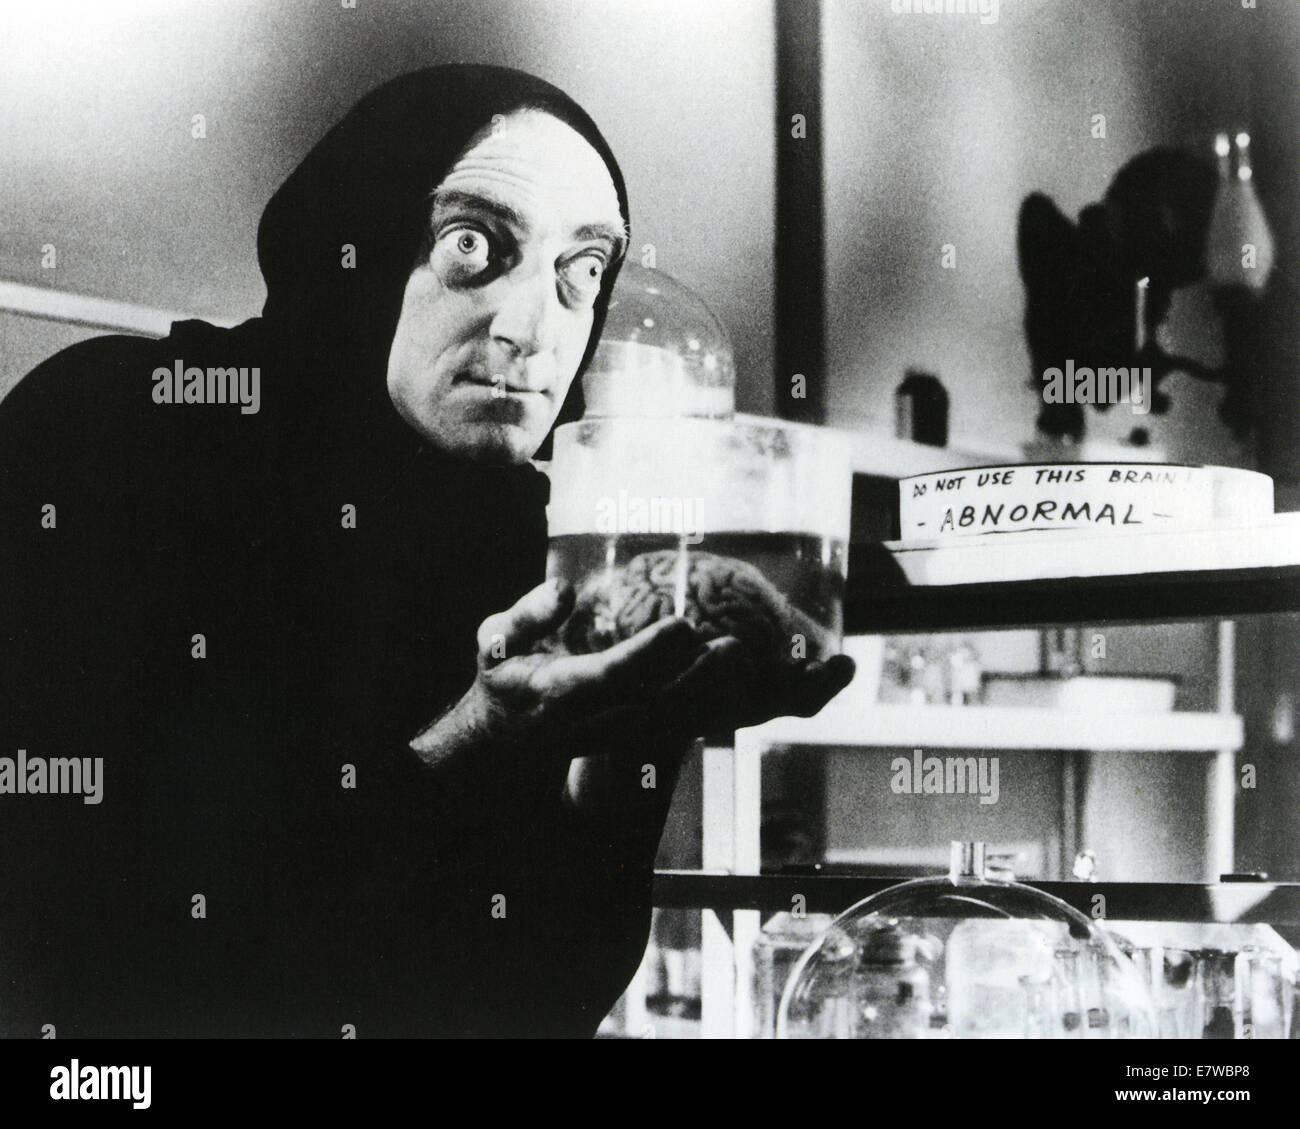 YOUNG FRANKENSTEIN 1974 Gruskoff/Venture films production directed by Mel Brooks starring Marty Feldman Stock Photo